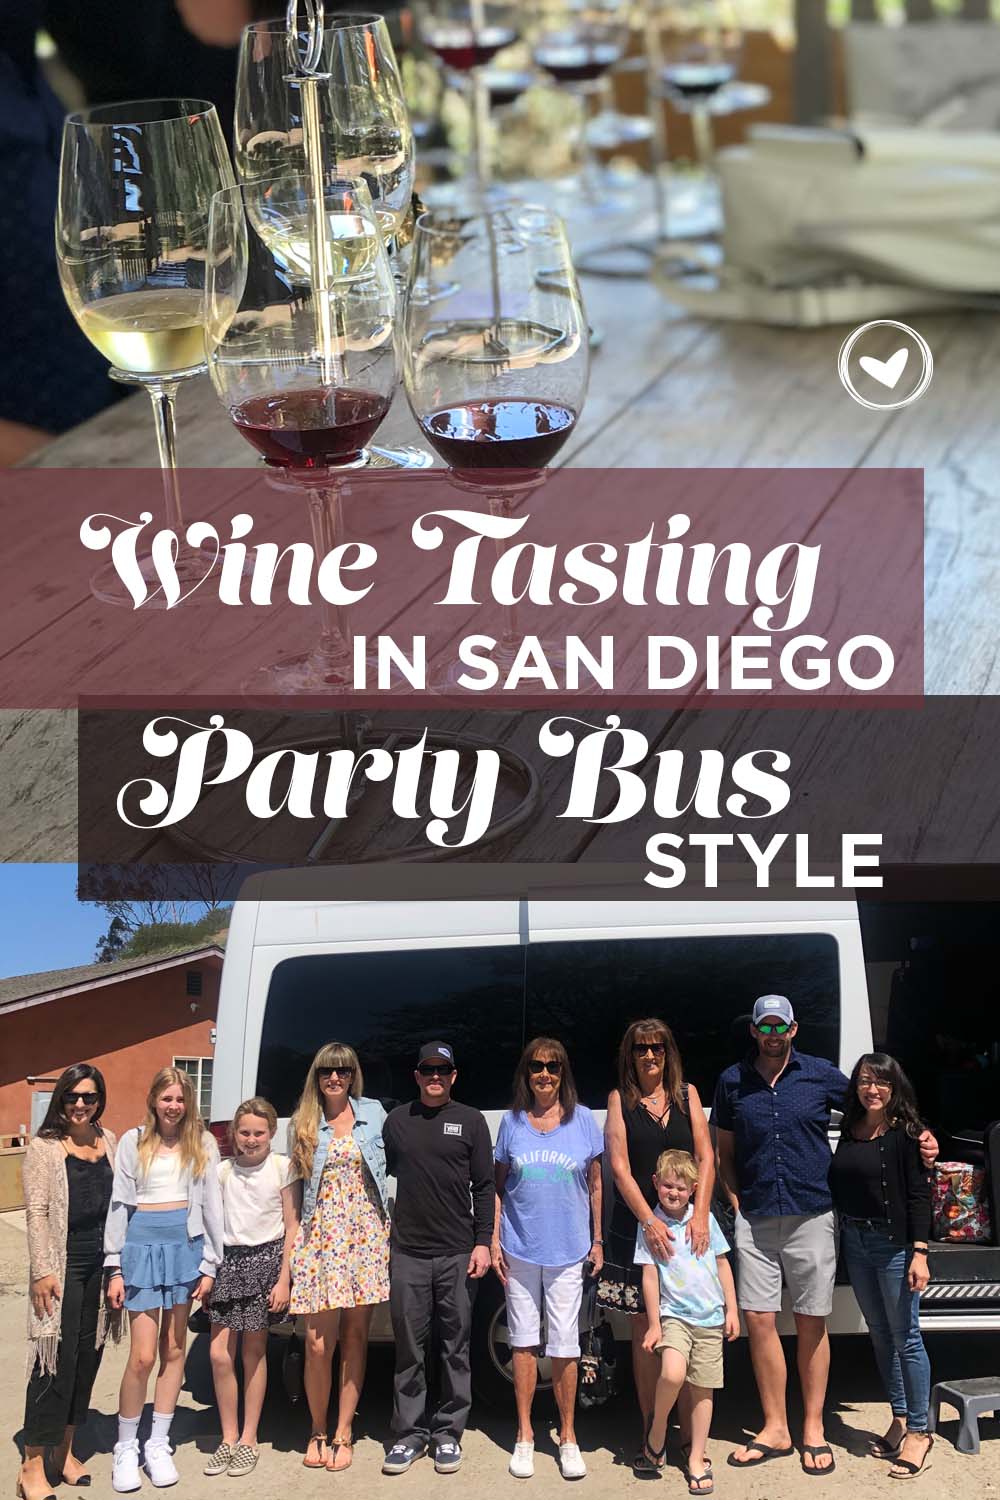 Wine Tasting in San Diego, Party Bus Style